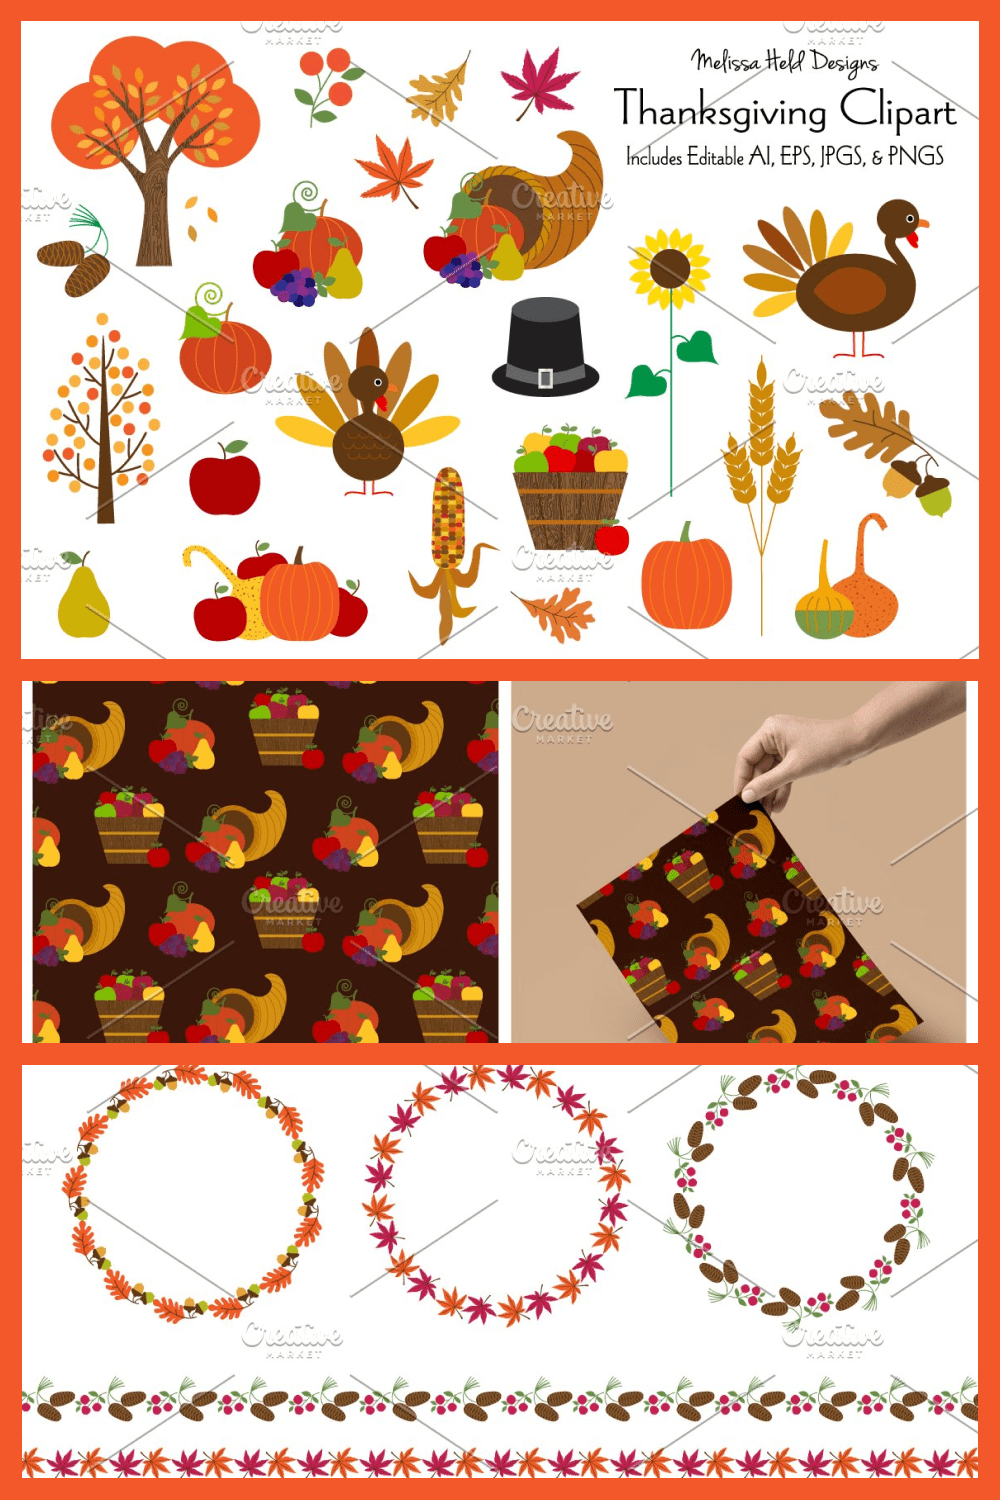 Thanksgiving clipart by Melissa Held Designs.